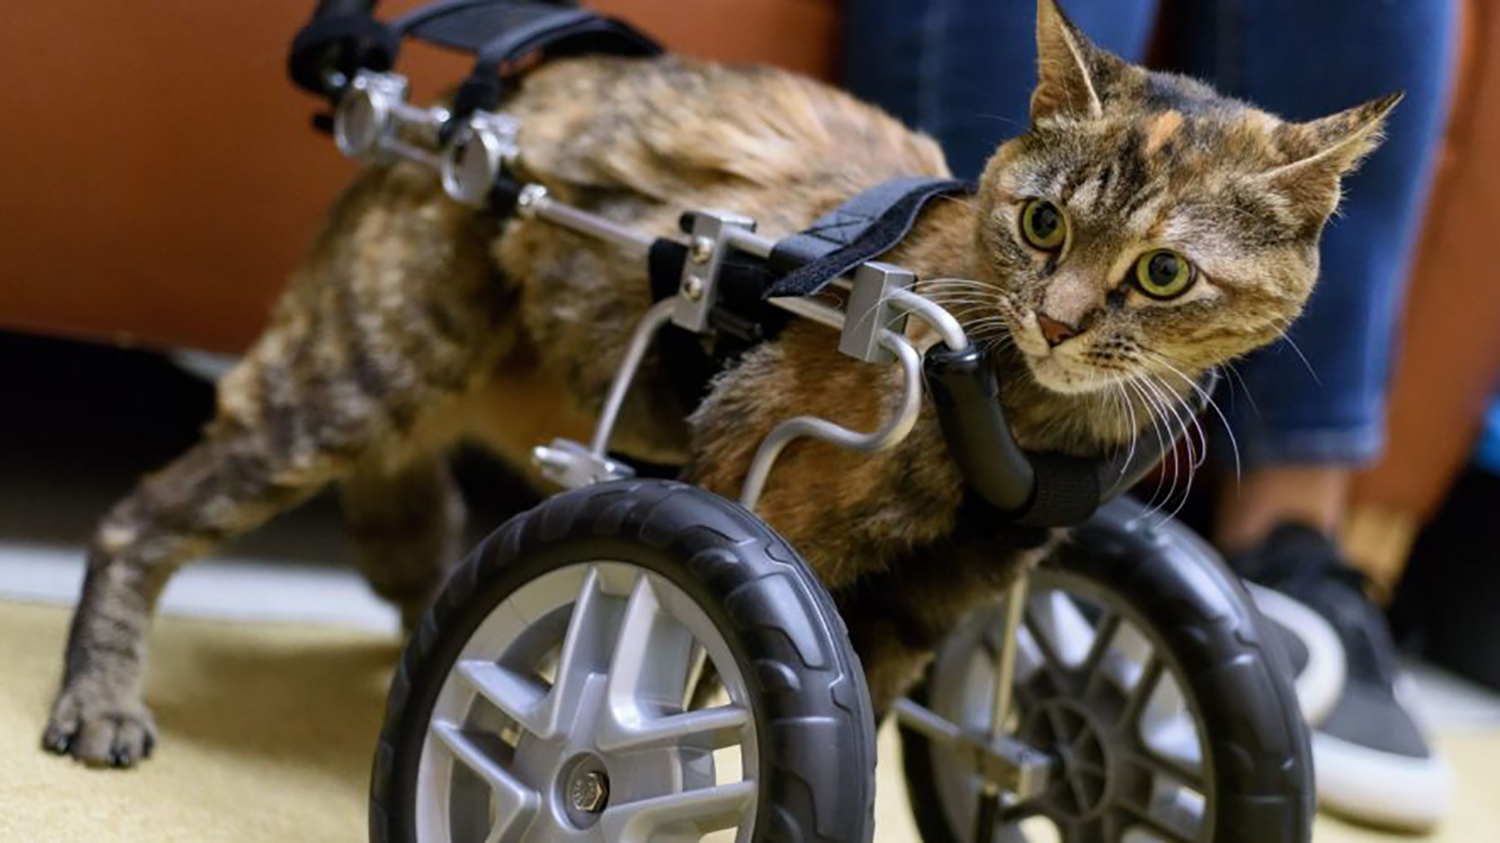 Cat in wheel cart without front legs